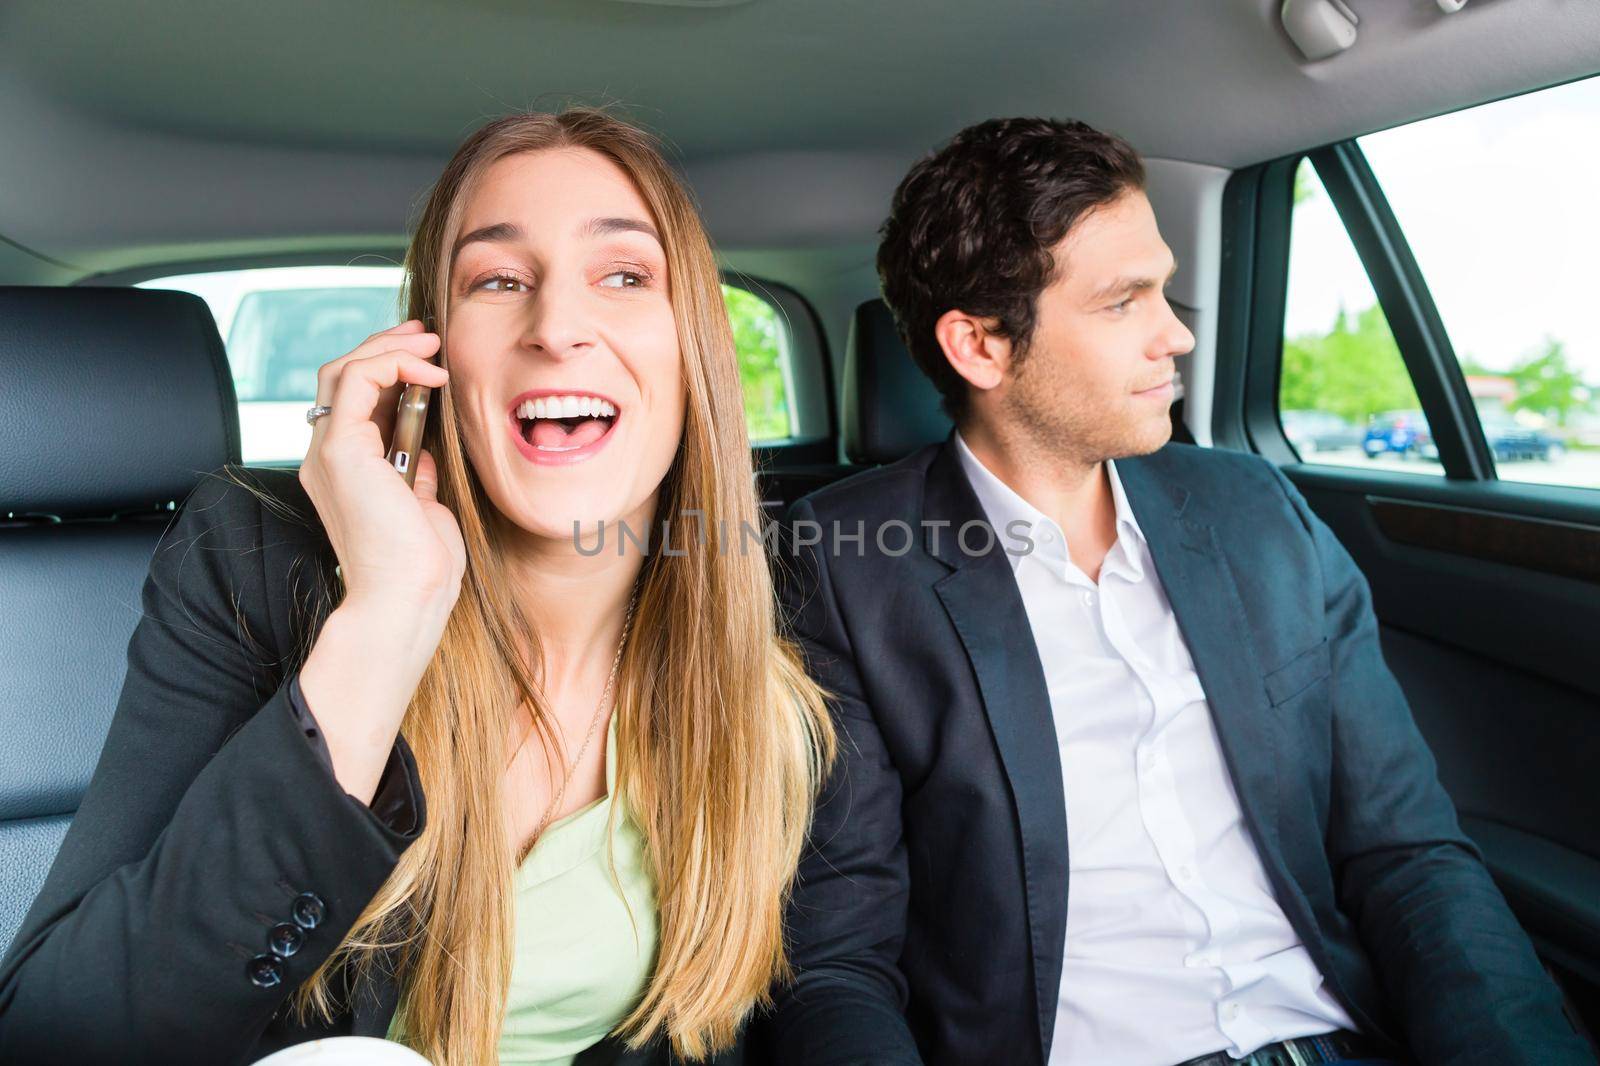 Young businesspeople traveling in taxi, she is busy on the phone, they are colleagues